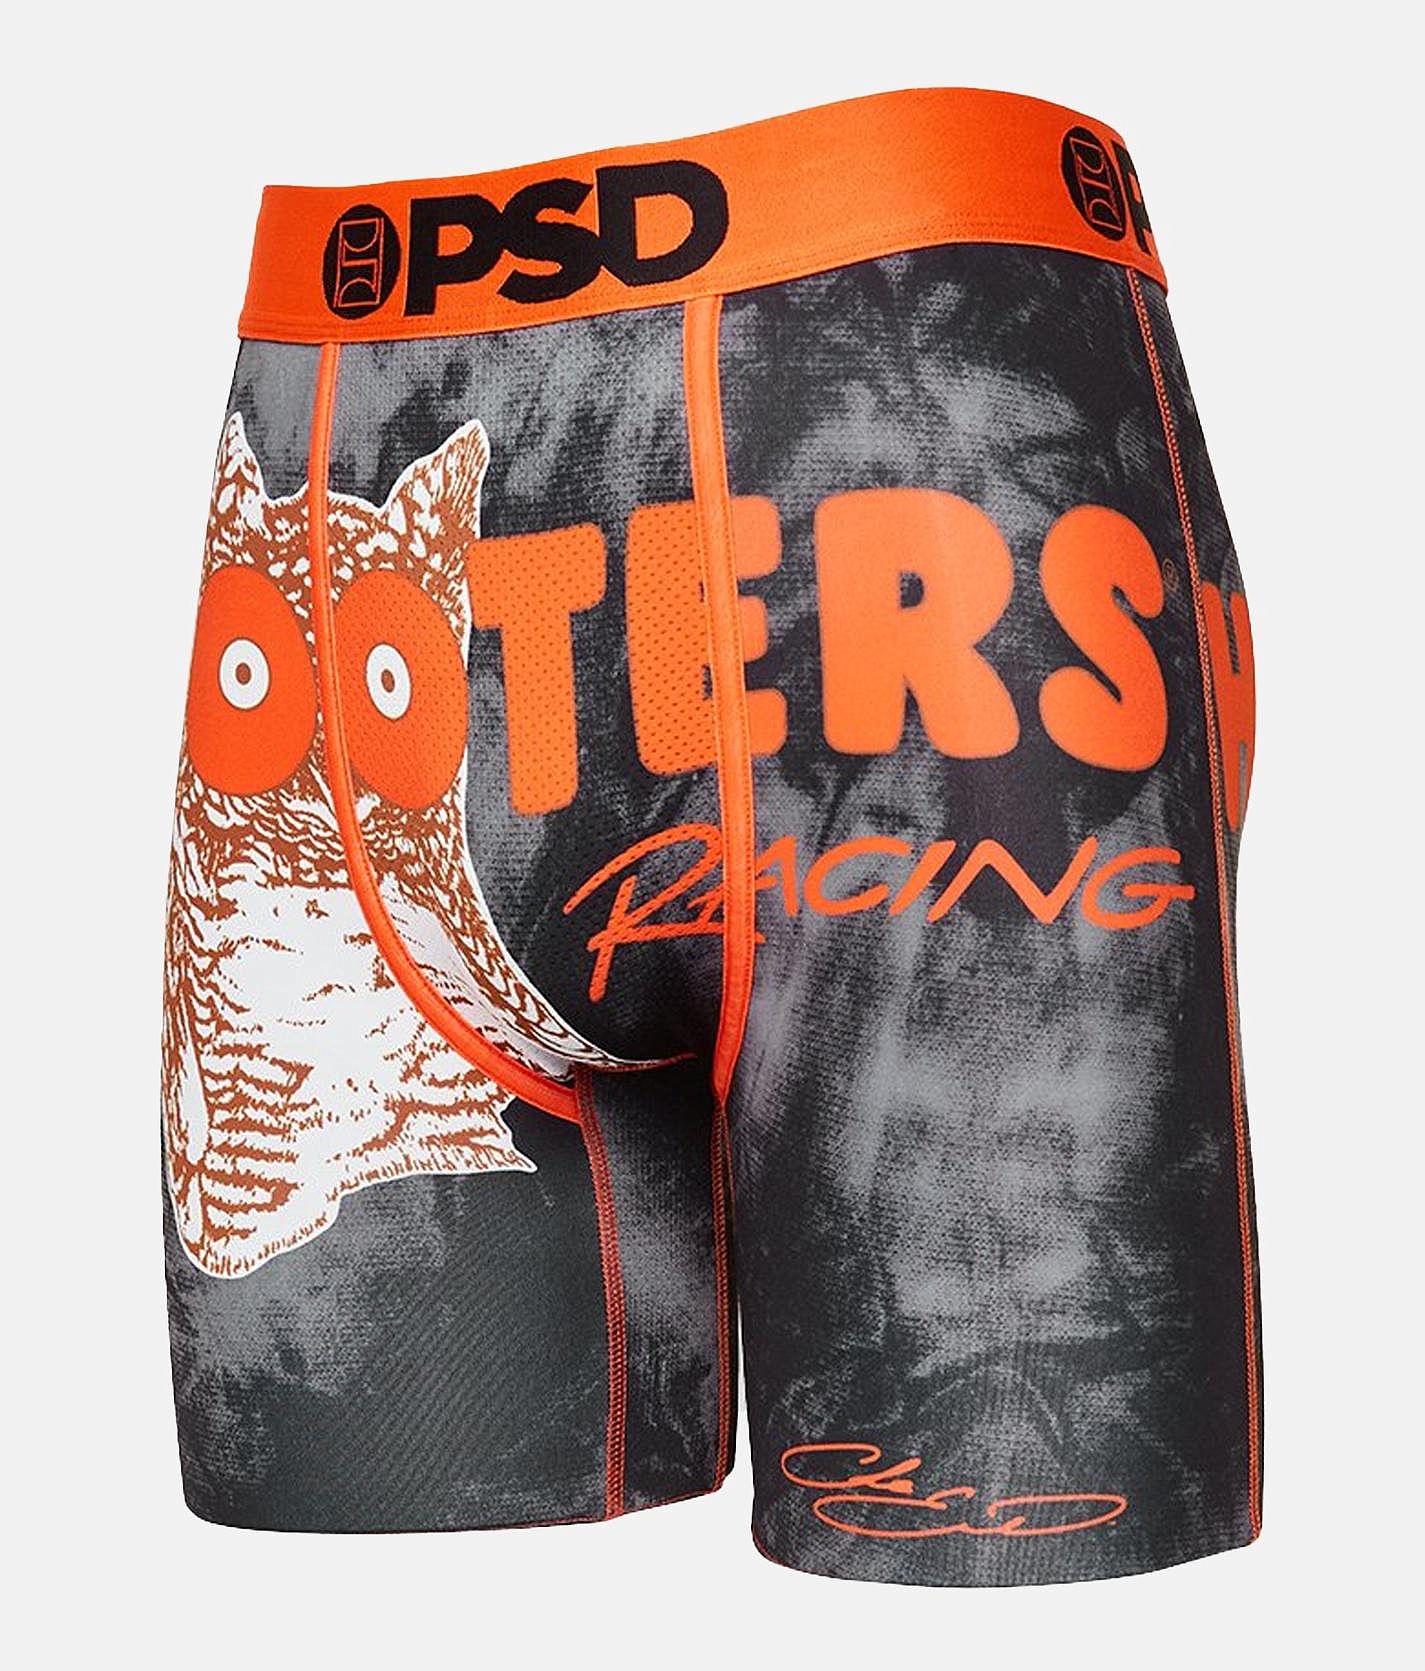 PSD Hooters® Stretch Boxer Briefs - Men's Boxers in Black